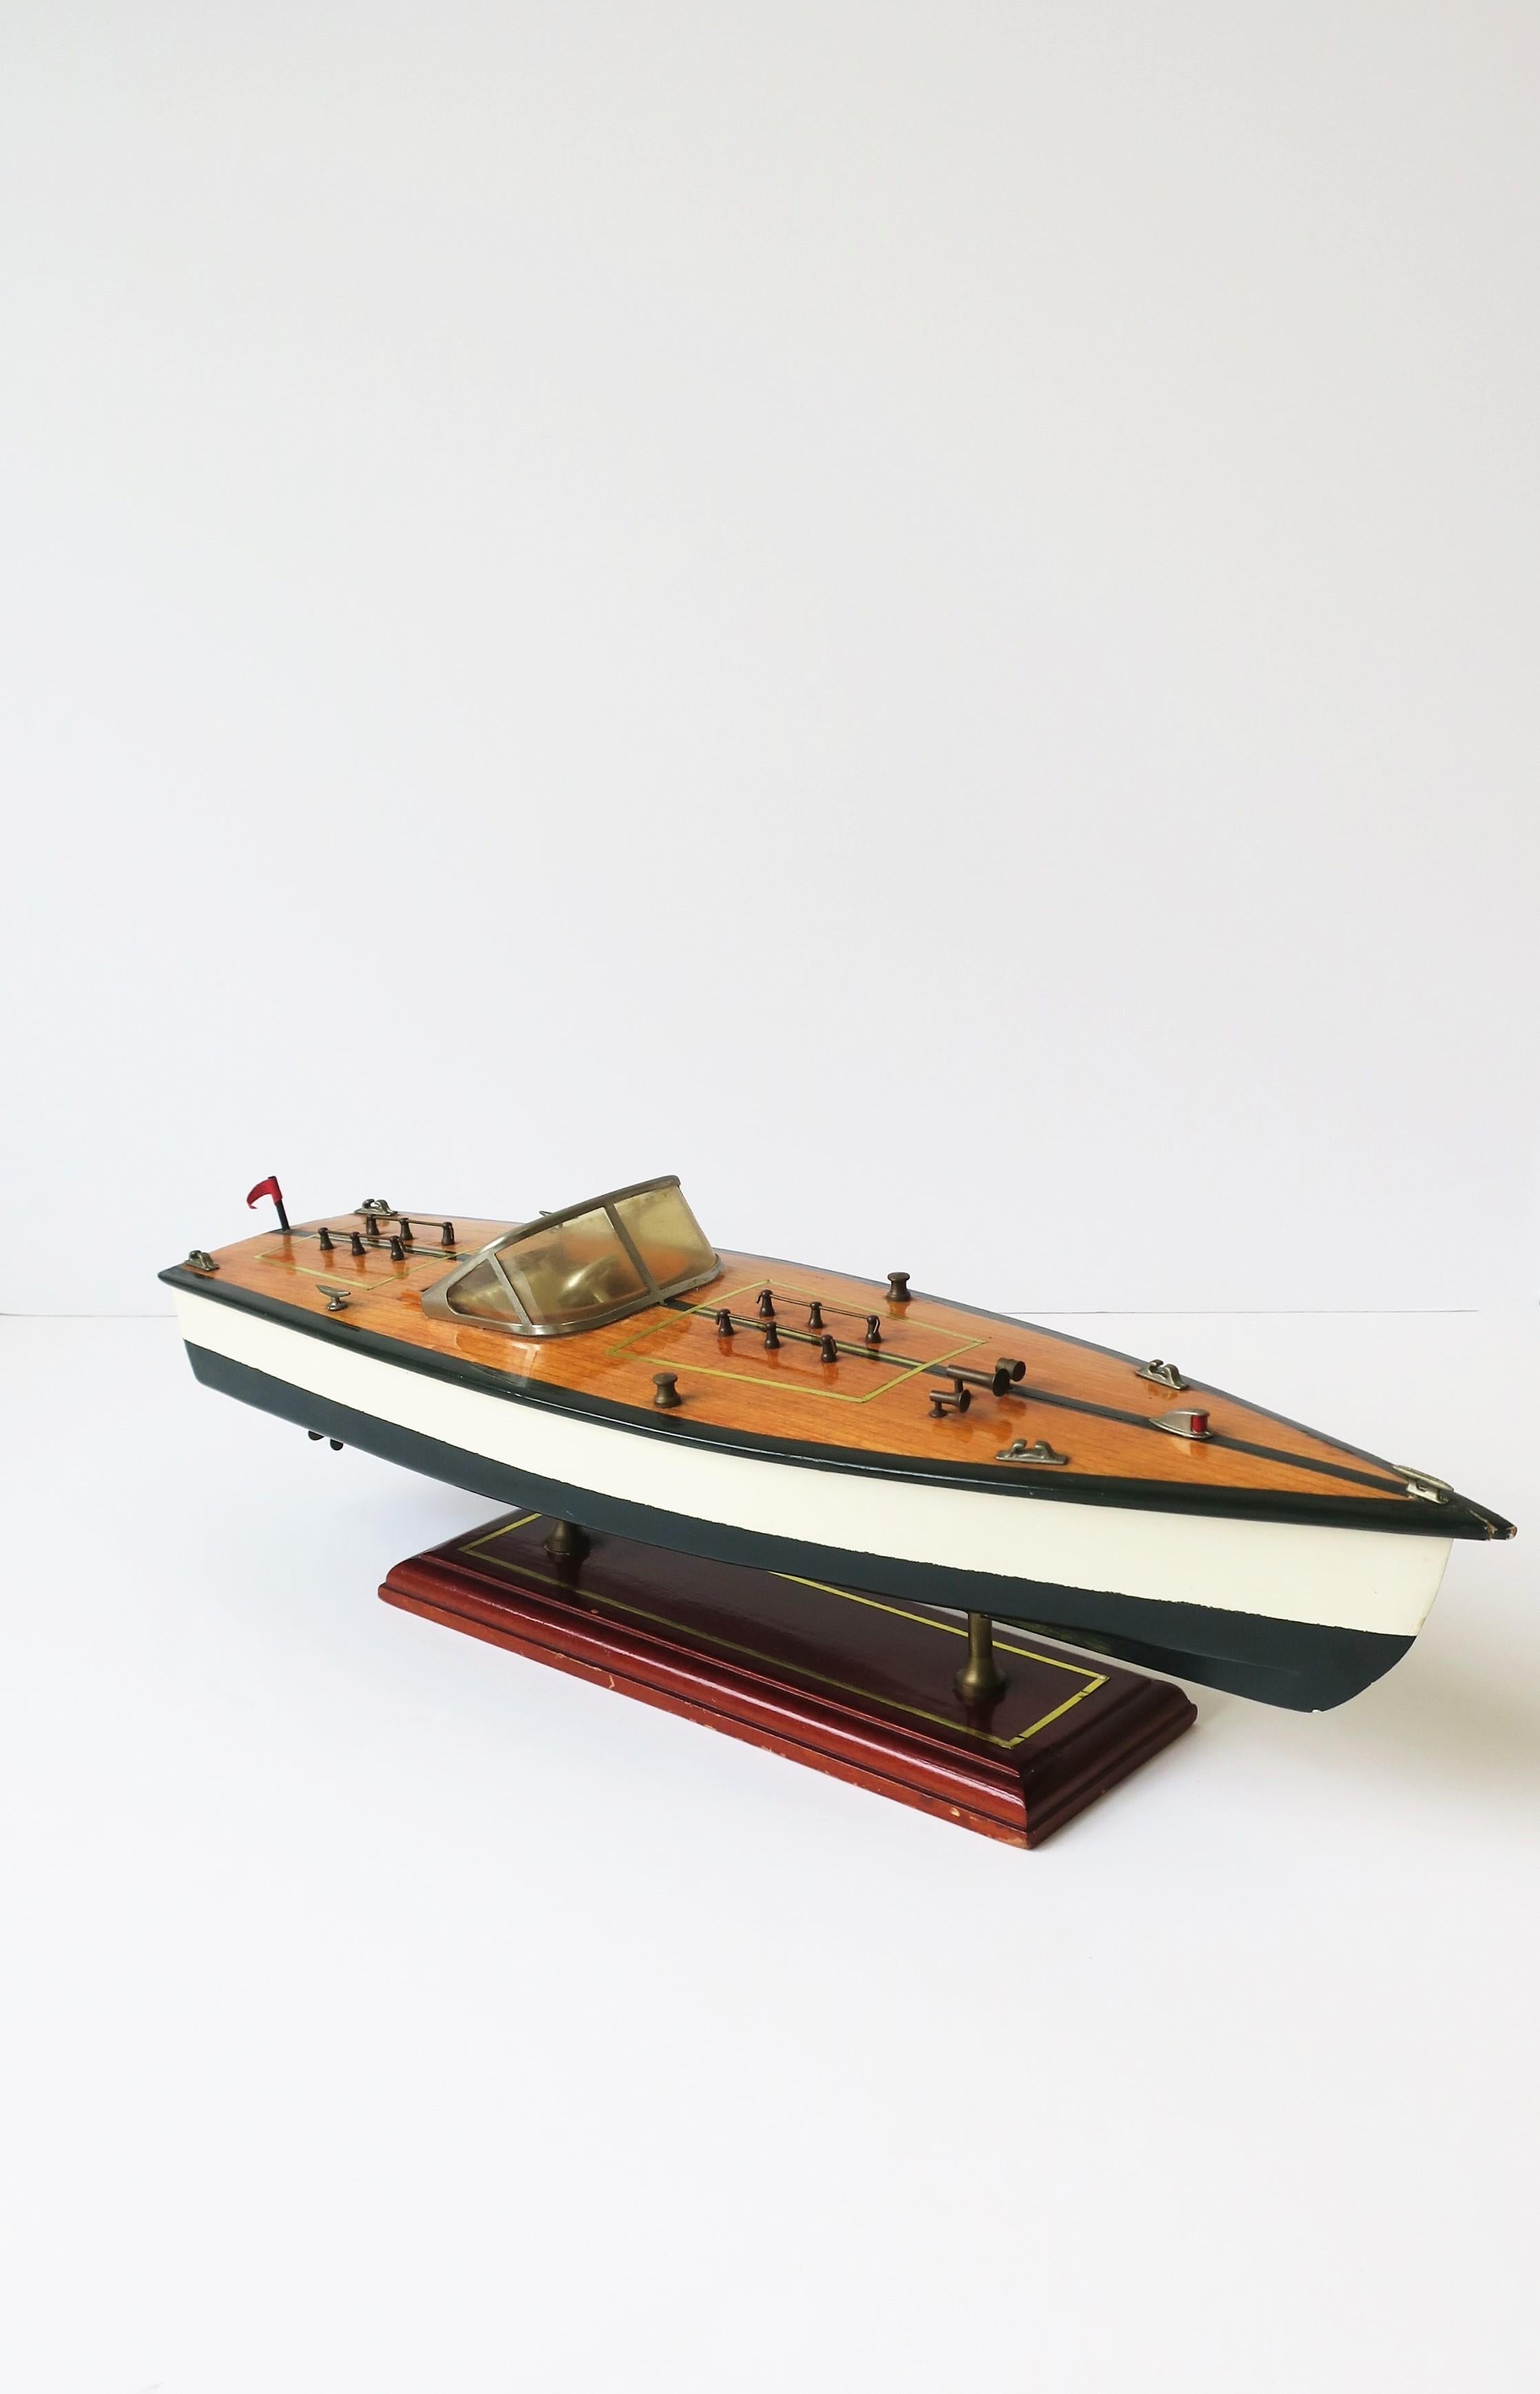 A vintage hand-made speed boat model, circa mid-20th century. A great model decorative object. Beautiful details including varnished mahogany wood deck, wrap around windshield, seating, steering wheel, deck cleats, exhaust pipe and propeller's,